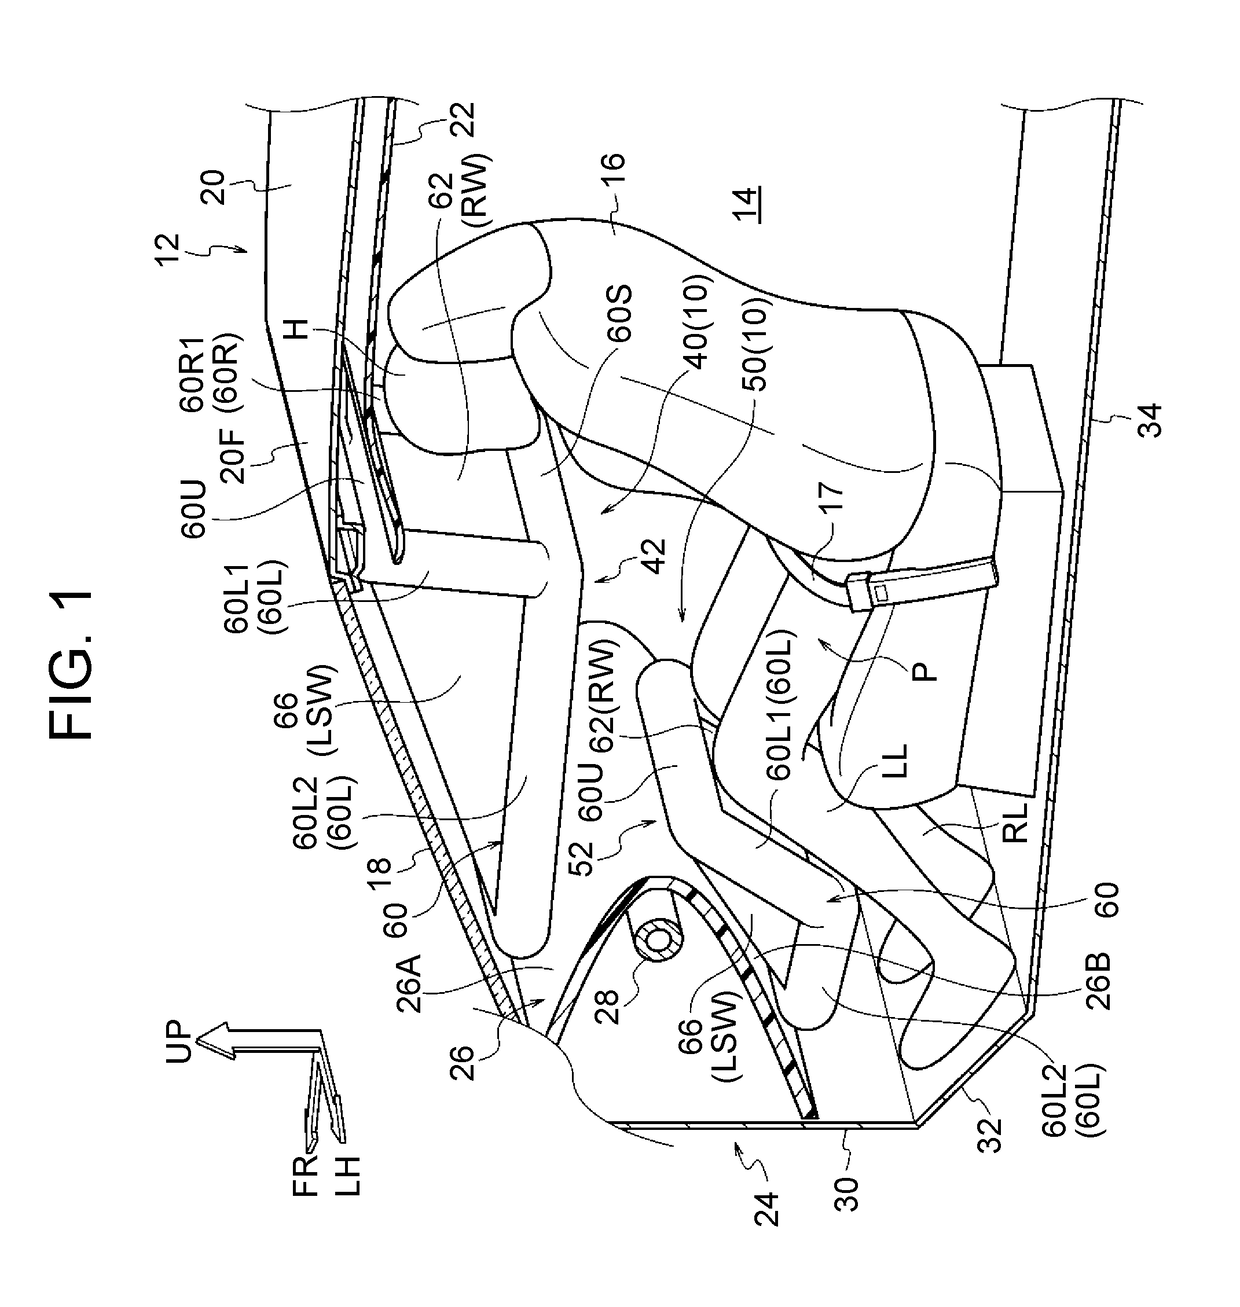 Passenger protection device for front passenger seat